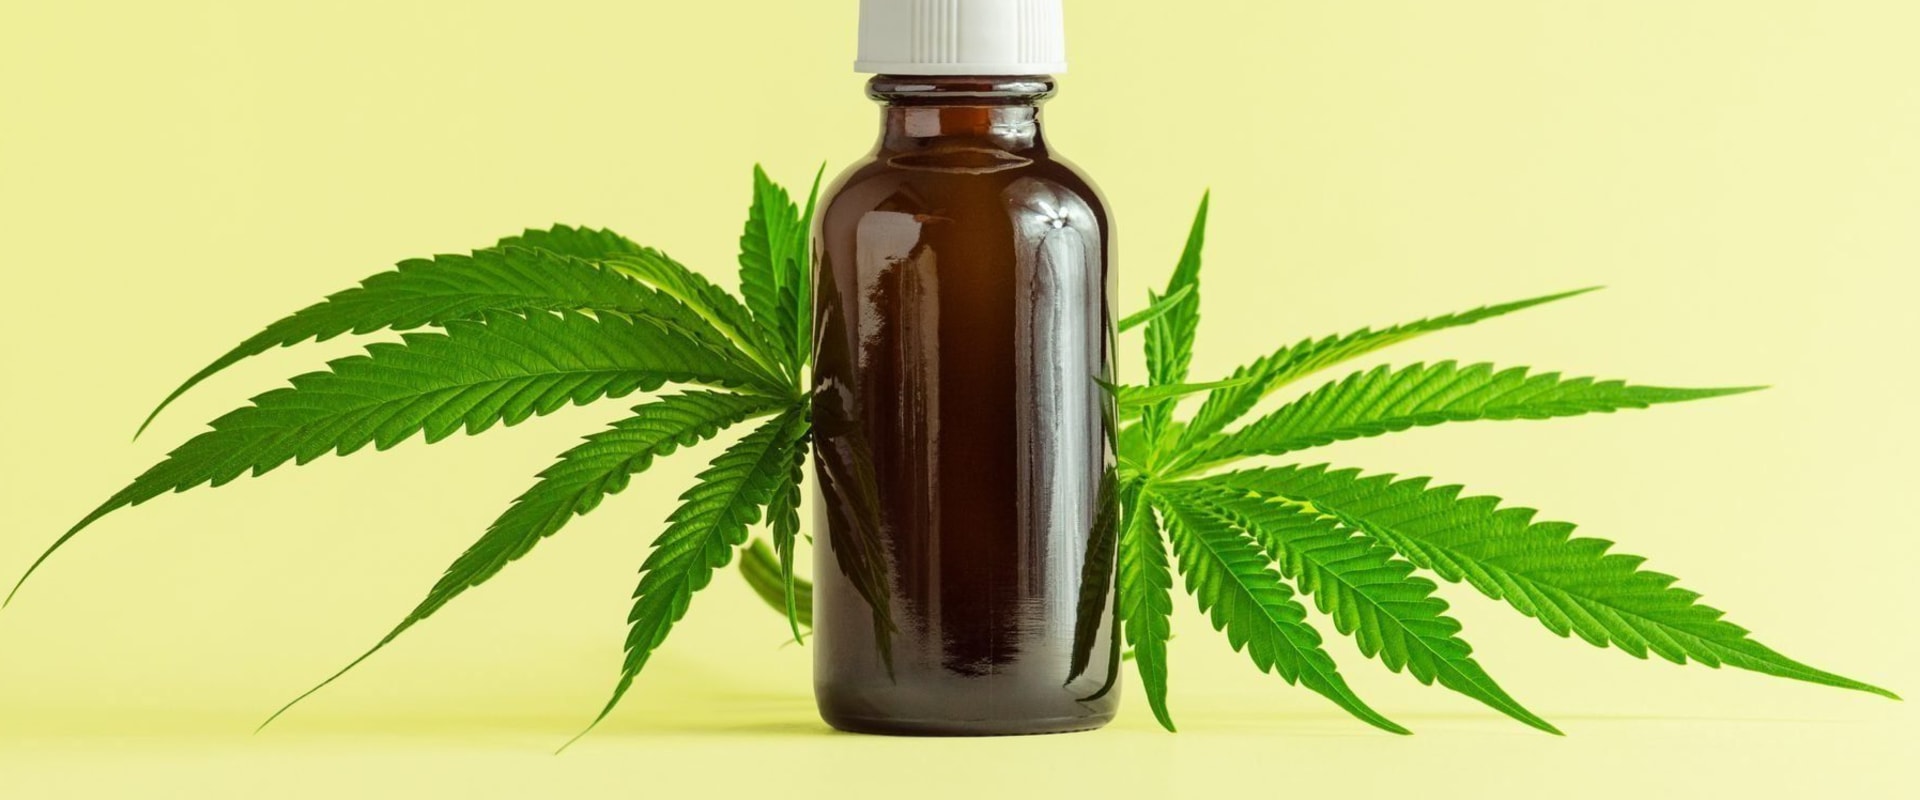 What Benefits Does Hemp Oil Offer?